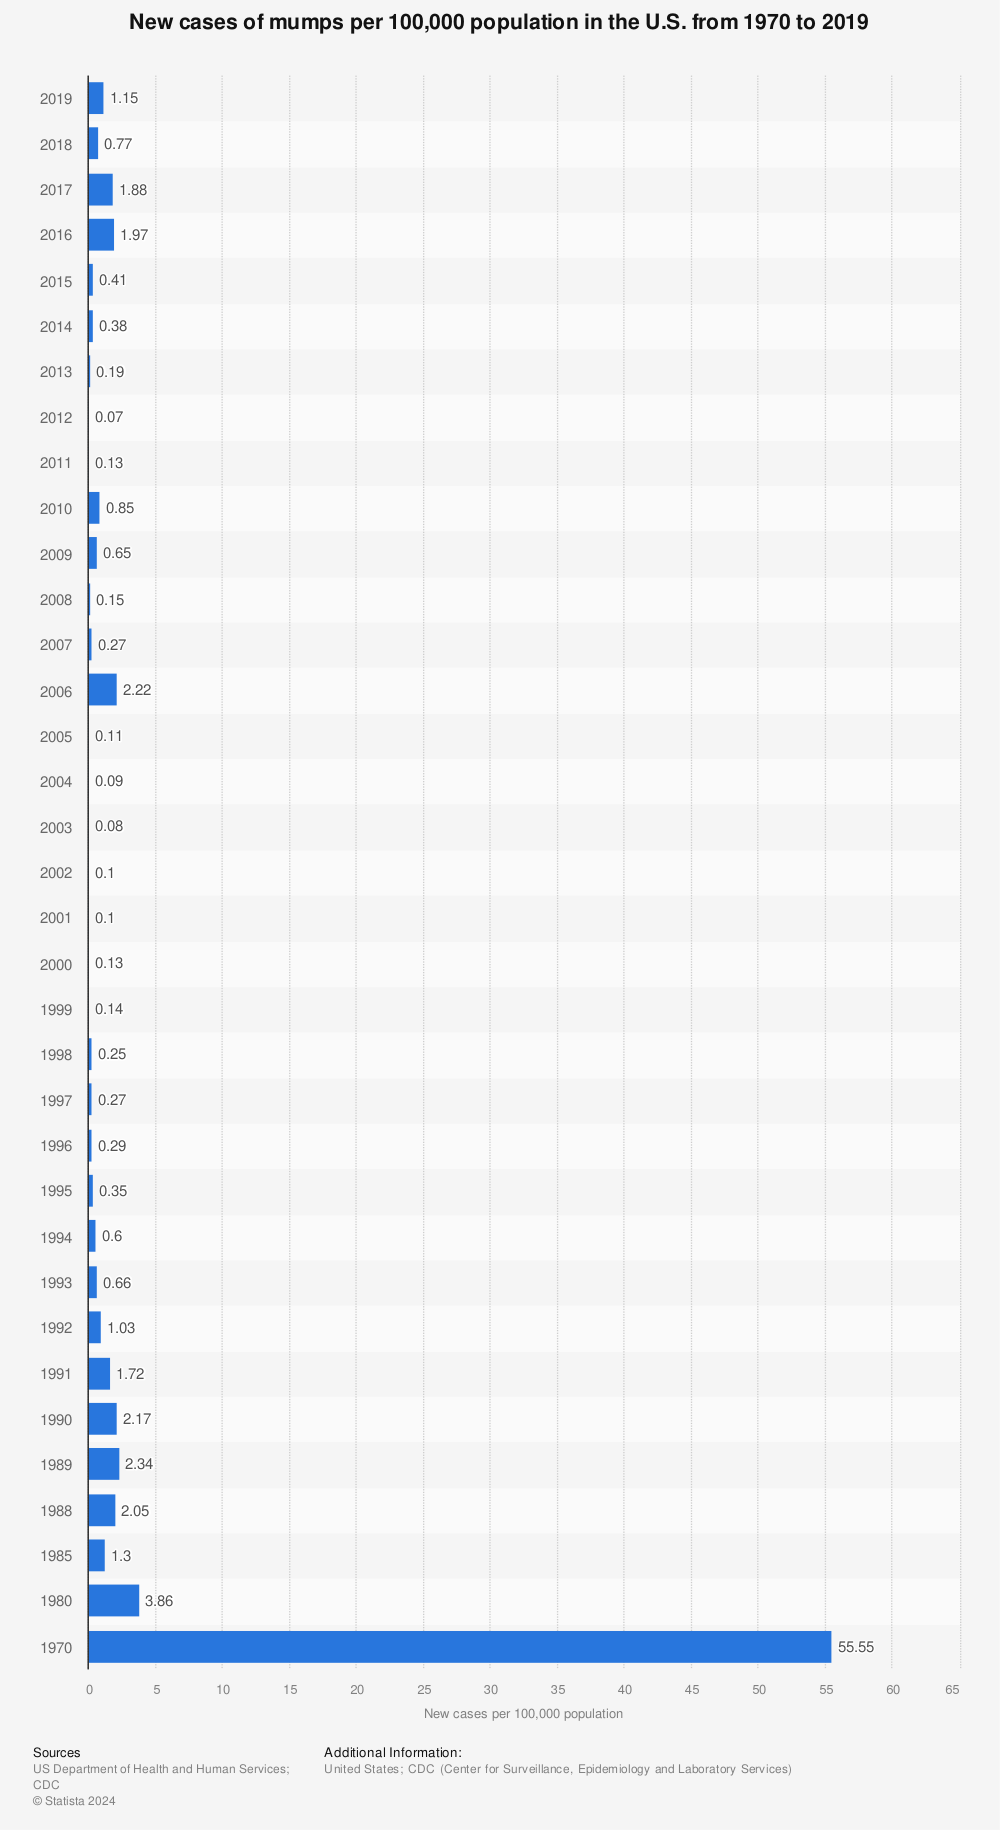 Statistic: New cases of mumps per 100,000 population in the U.S. from 1970 to 2018 | Statista